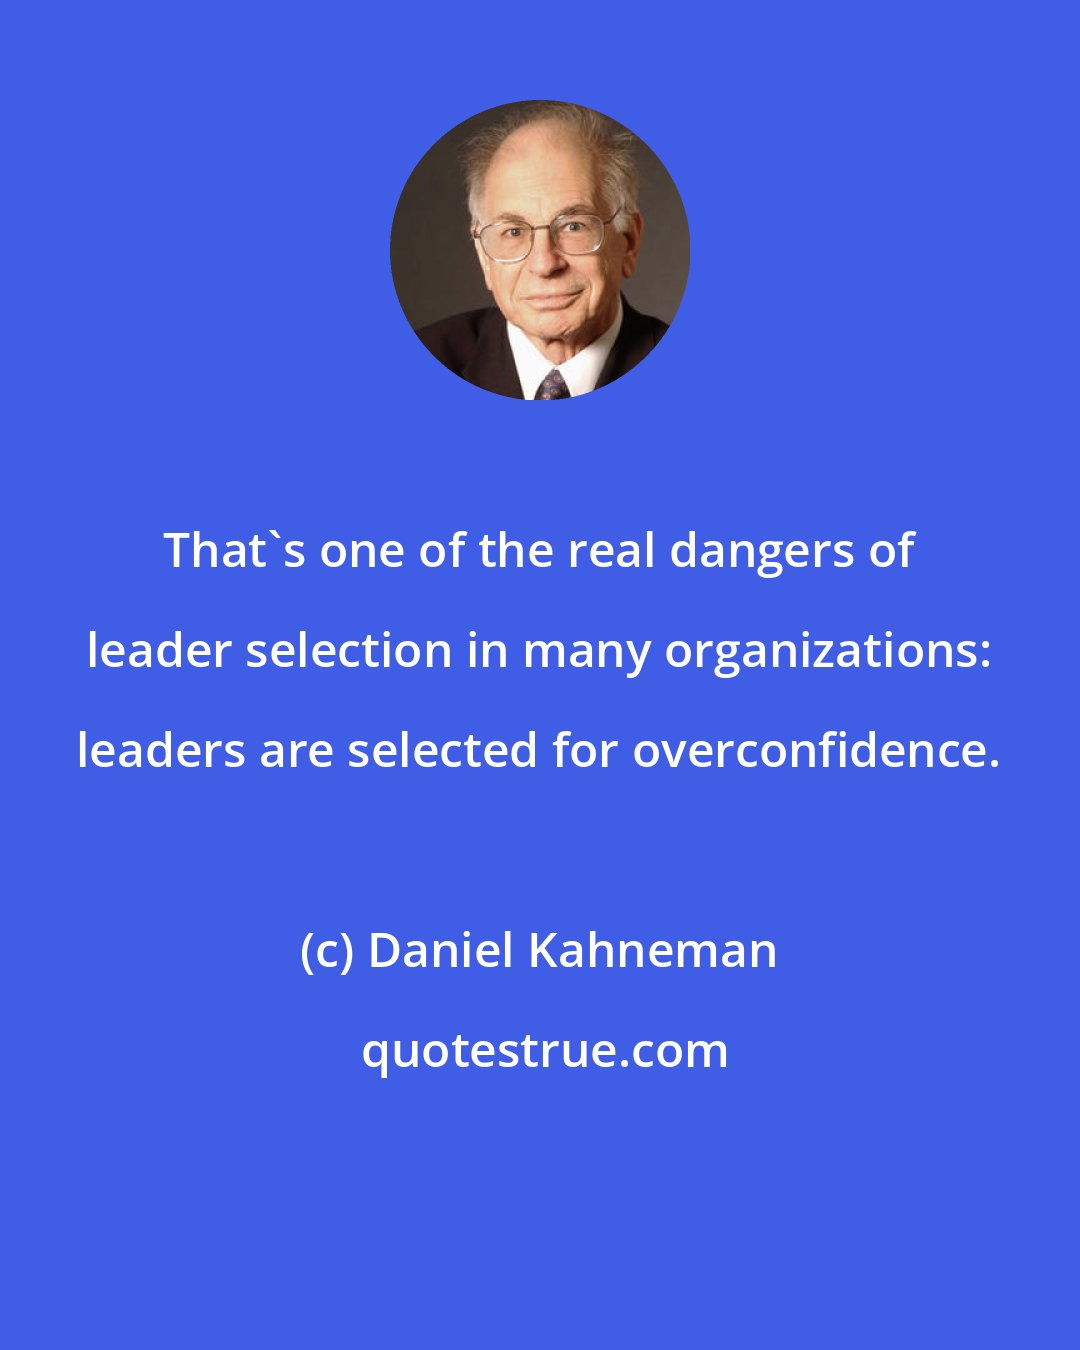 Daniel Kahneman: That's one of the real dangers of leader selection in many organizations: leaders are selected for overconfidence.